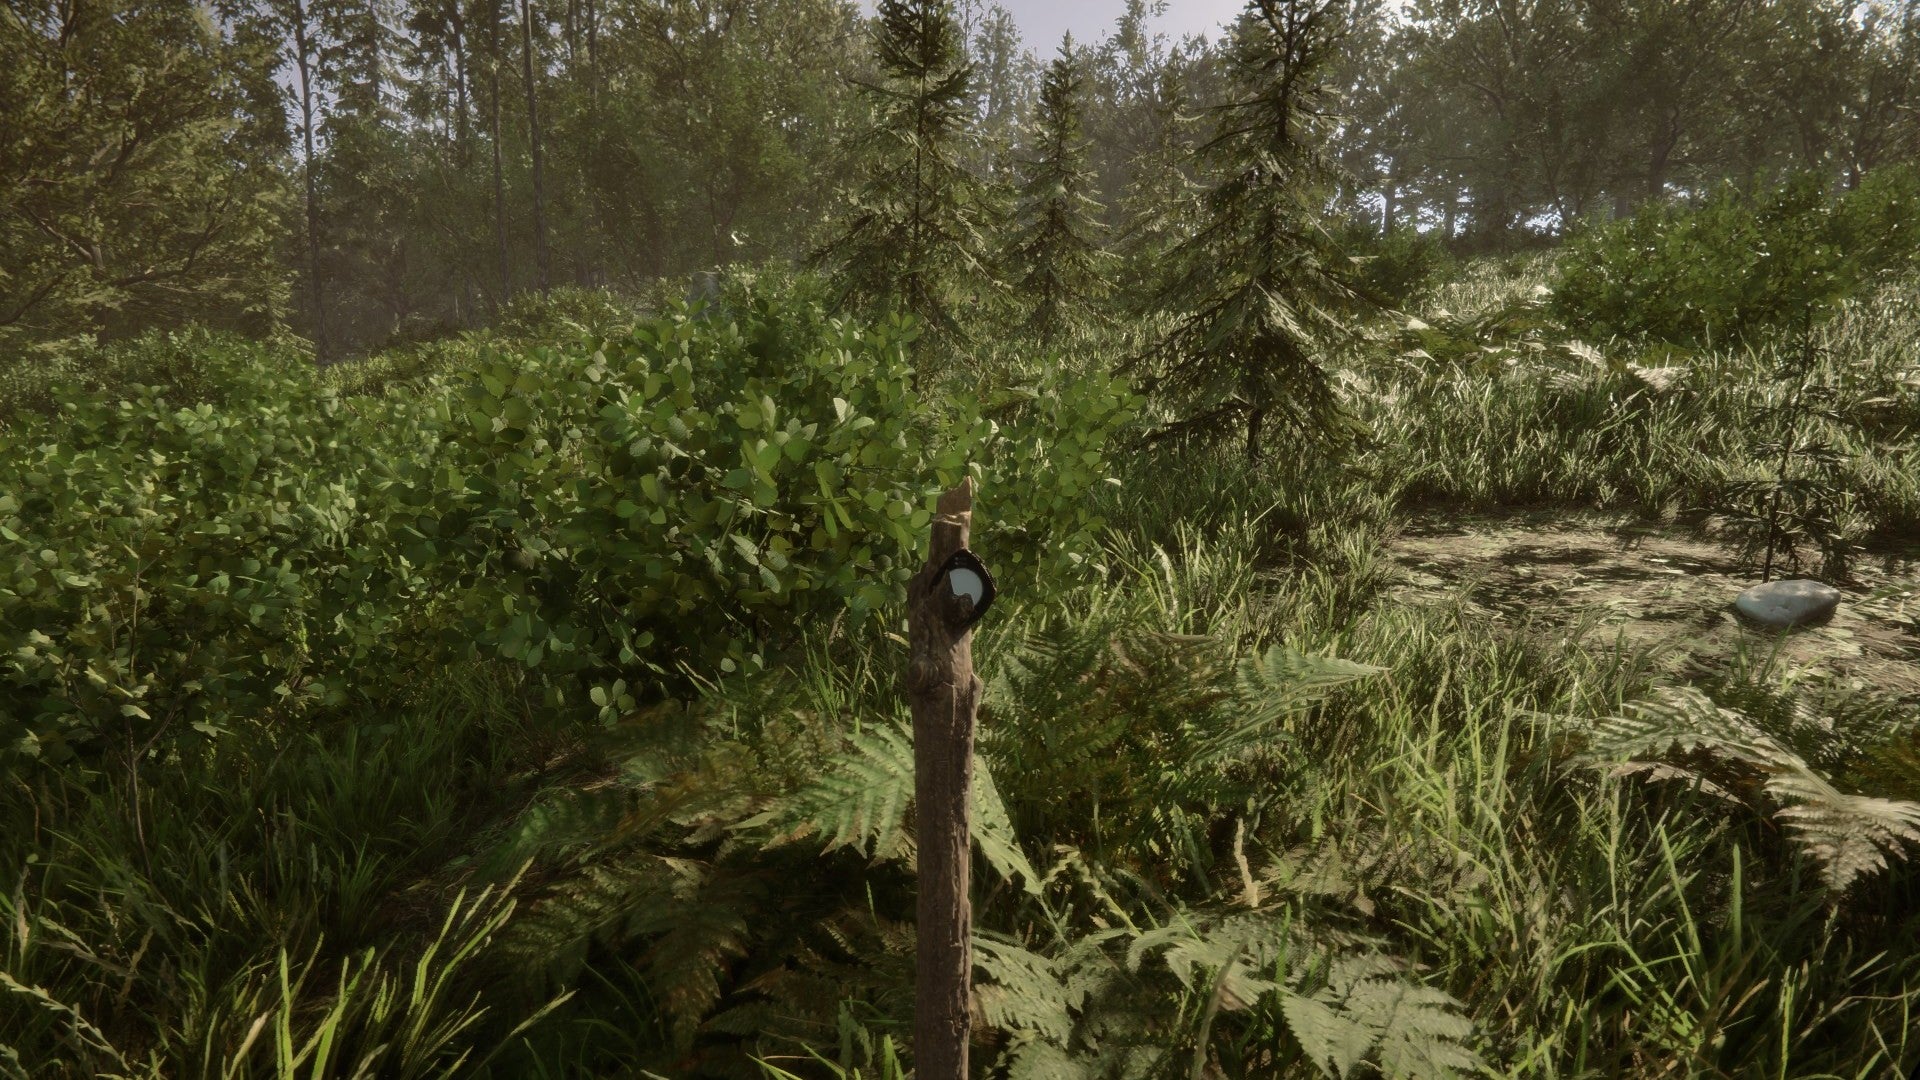 Sons of the Forest player stares at a GPS locator on a stick.